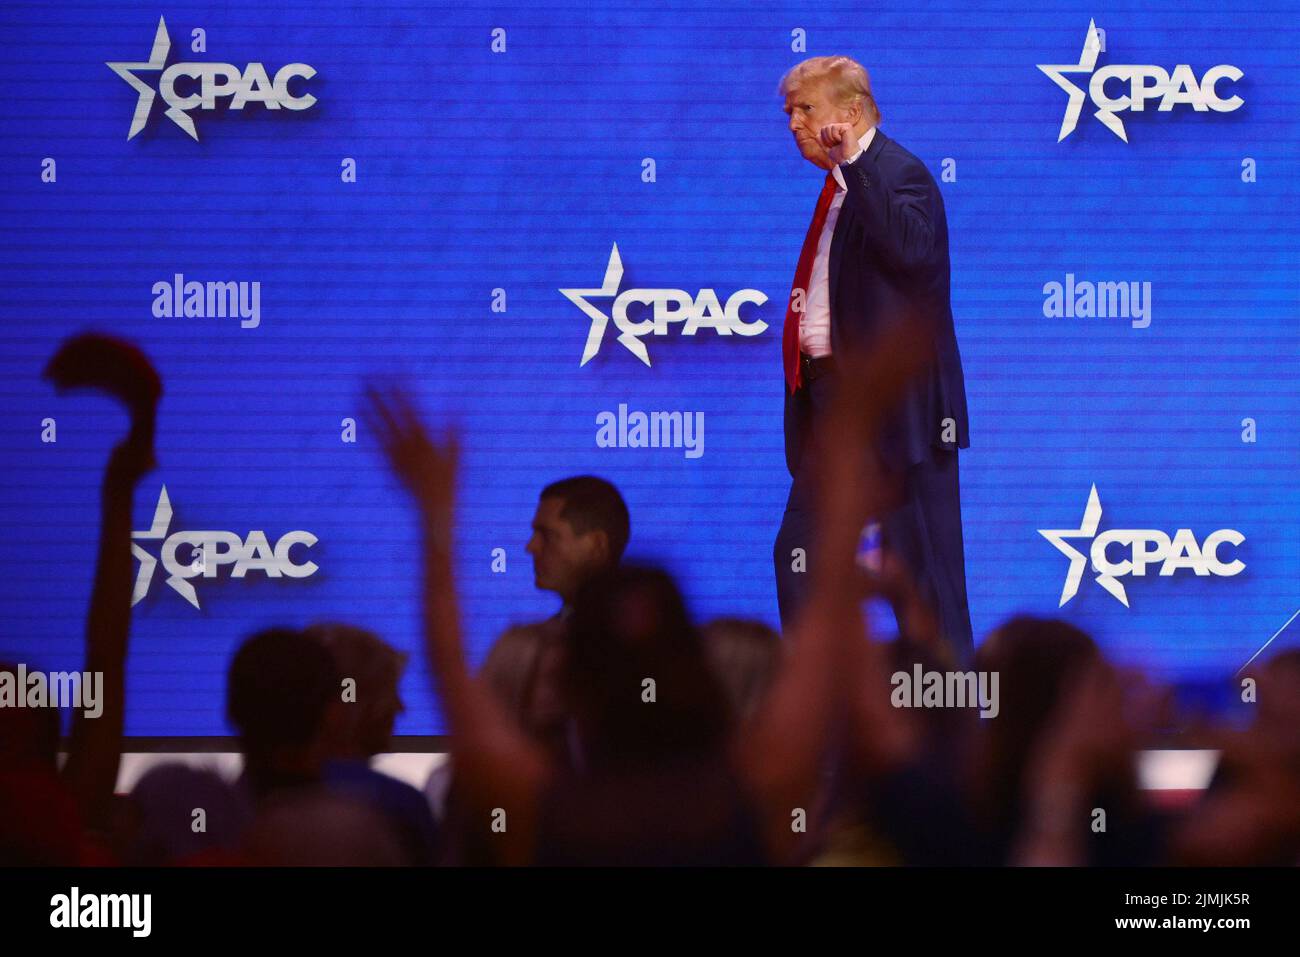 Former U.S. President Donald Trump walks off-stage after speaking at the Conservative Political Action Conference (CPAC) in Dallas, Texas, U.S., August 6, 2022.  REUTERS/Brian Snyder Stock Photo